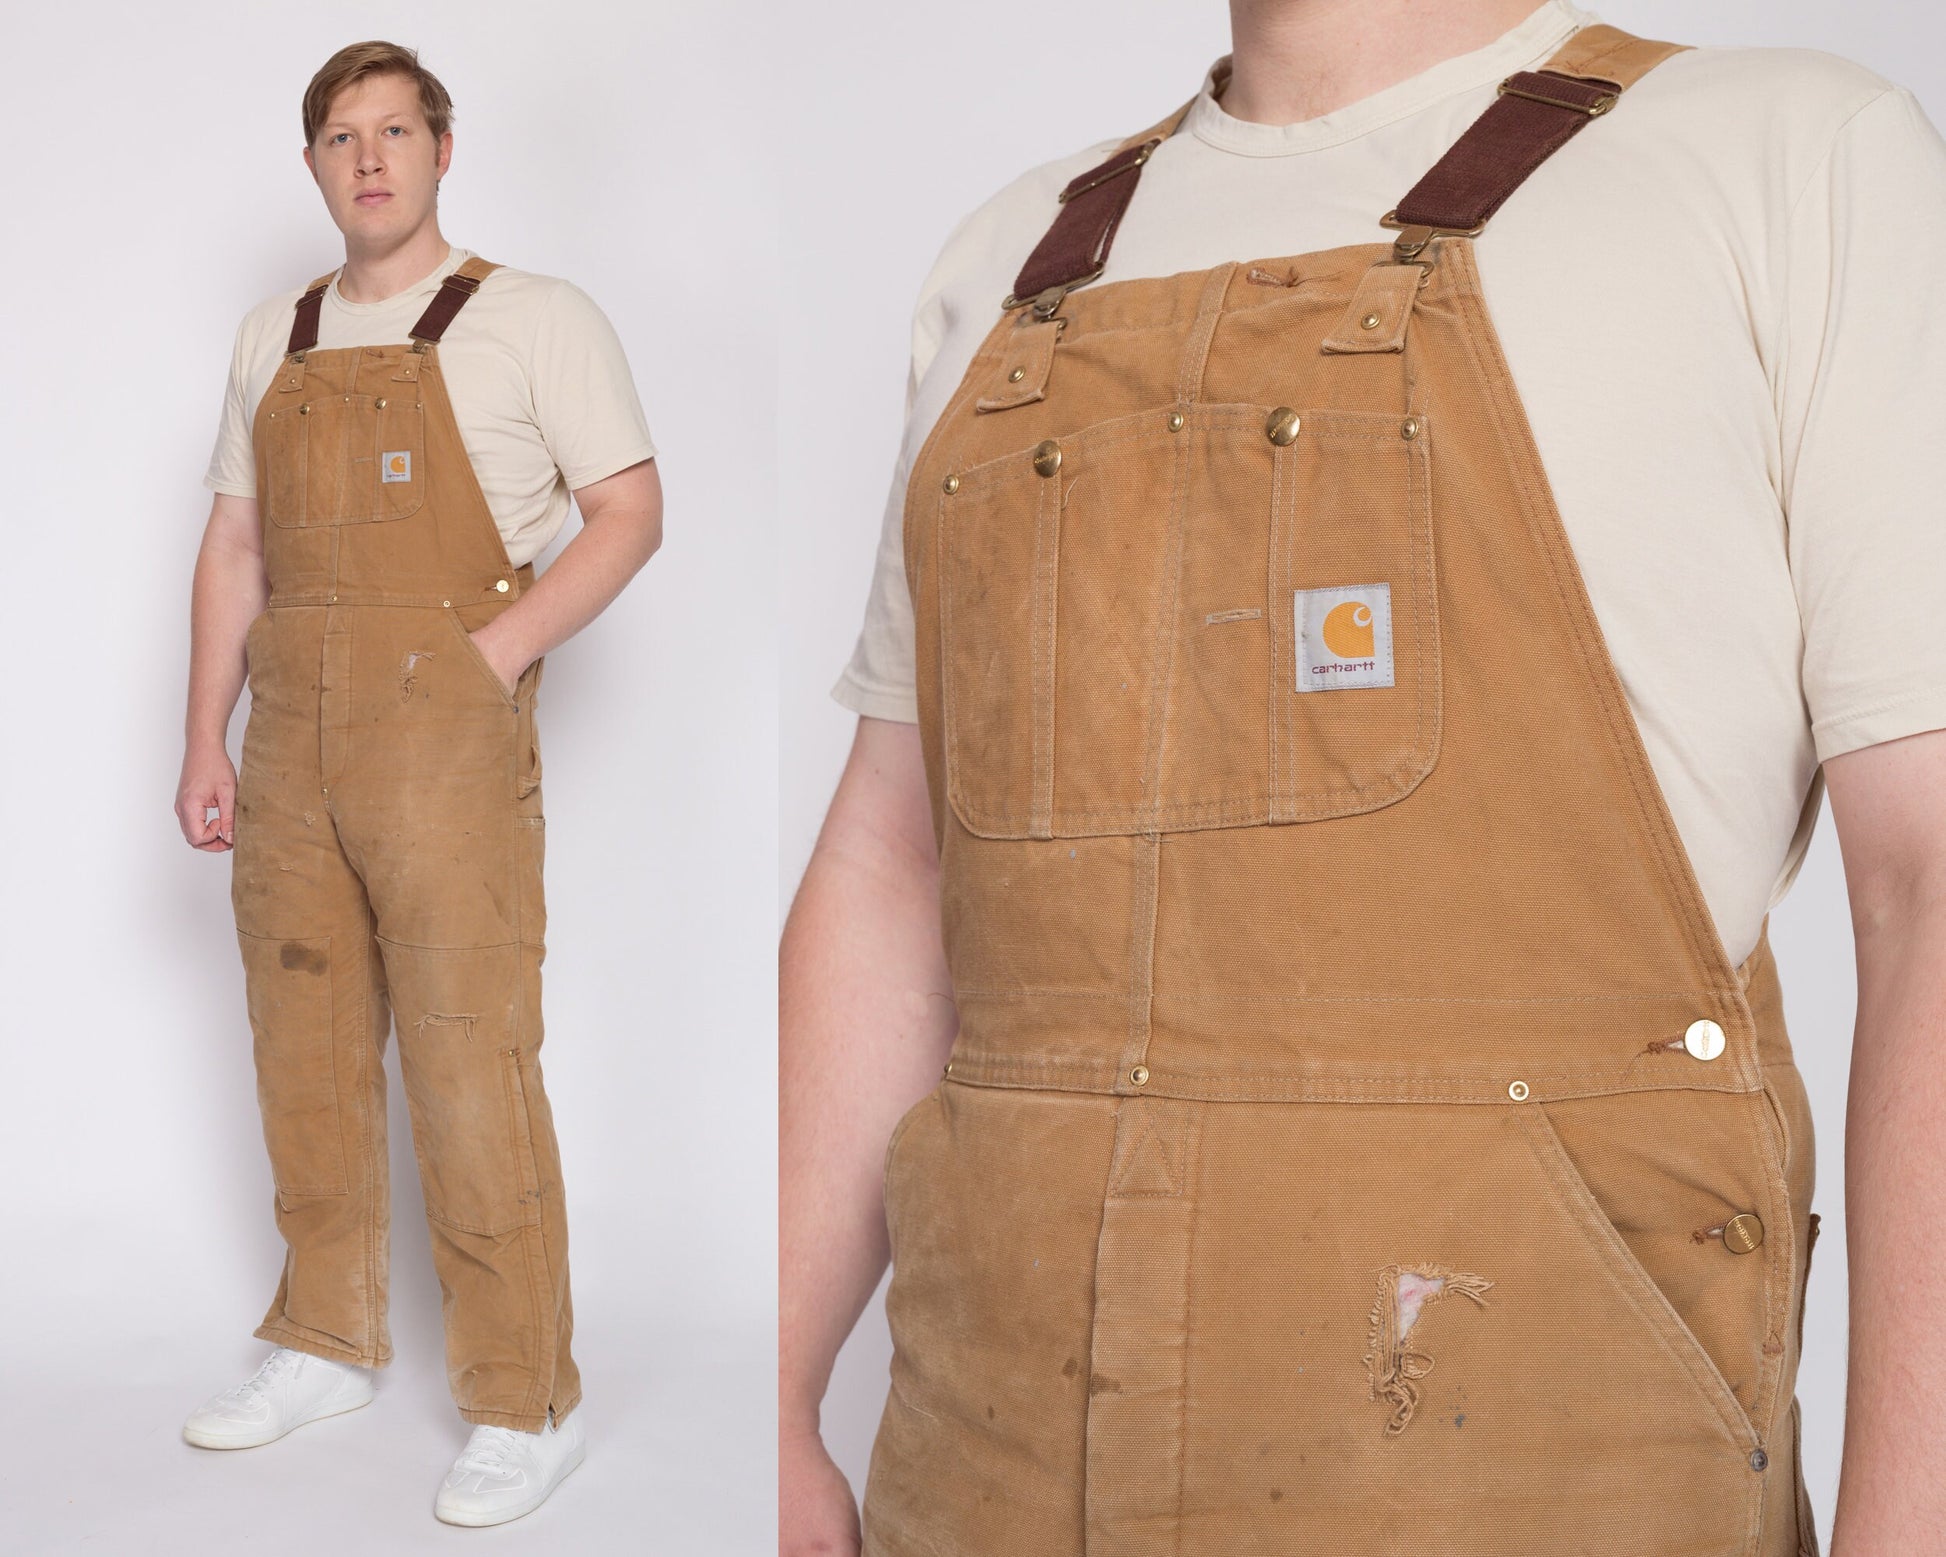 90s Carhartt Insulated Quilt Lined Distressed Overalls - 38x34 | Vintage Made In USA Tan Workwear Jumpsuit